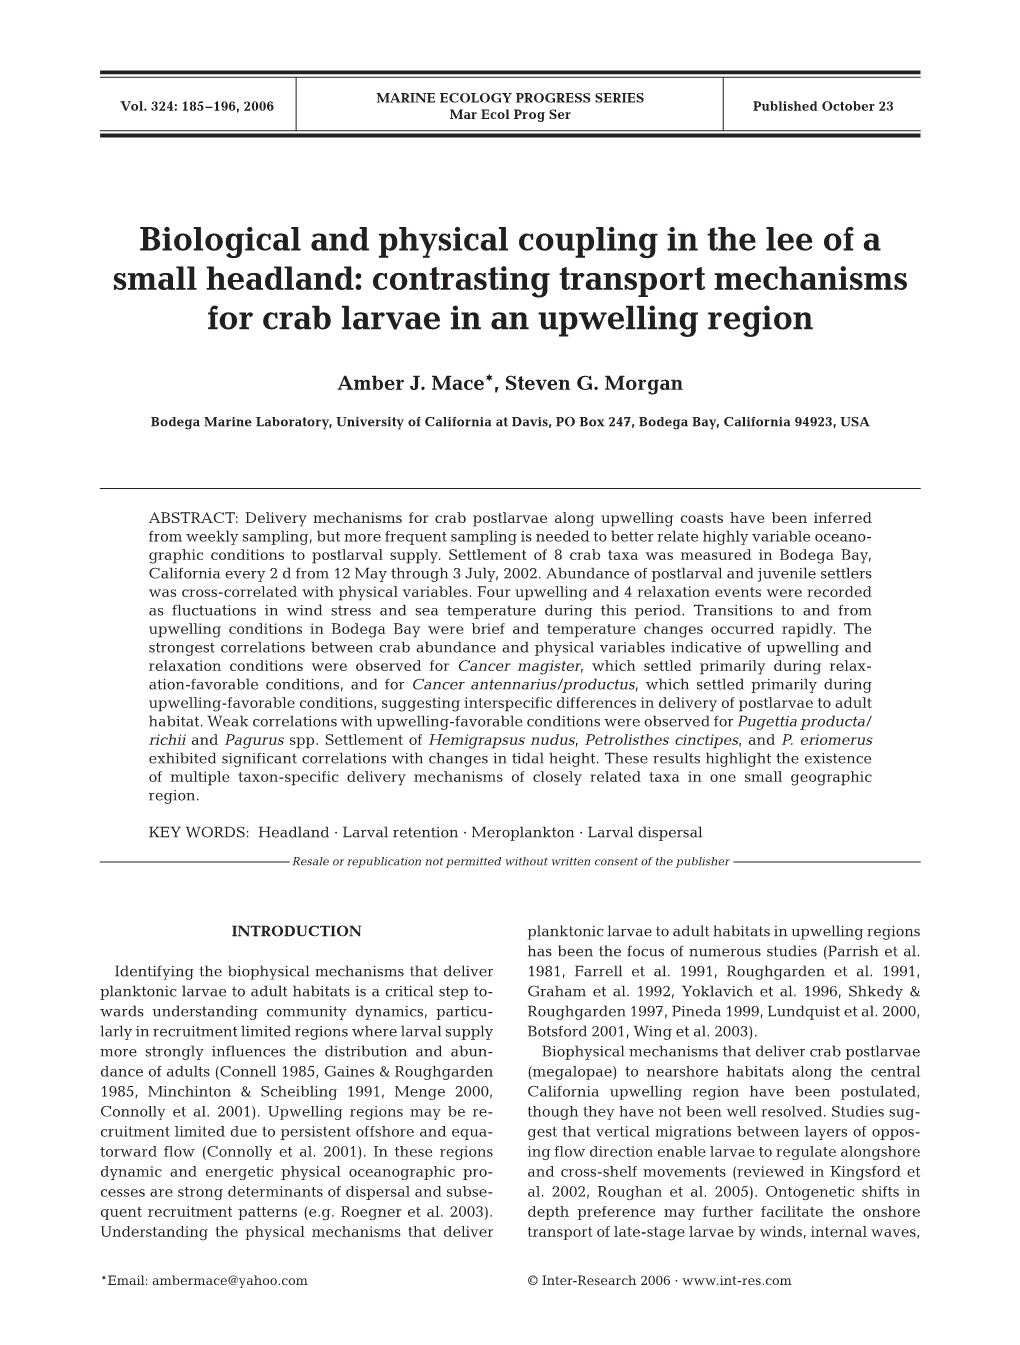 Contrasting Transport Mechanisms for Crab Larvae in an Upwelling Region